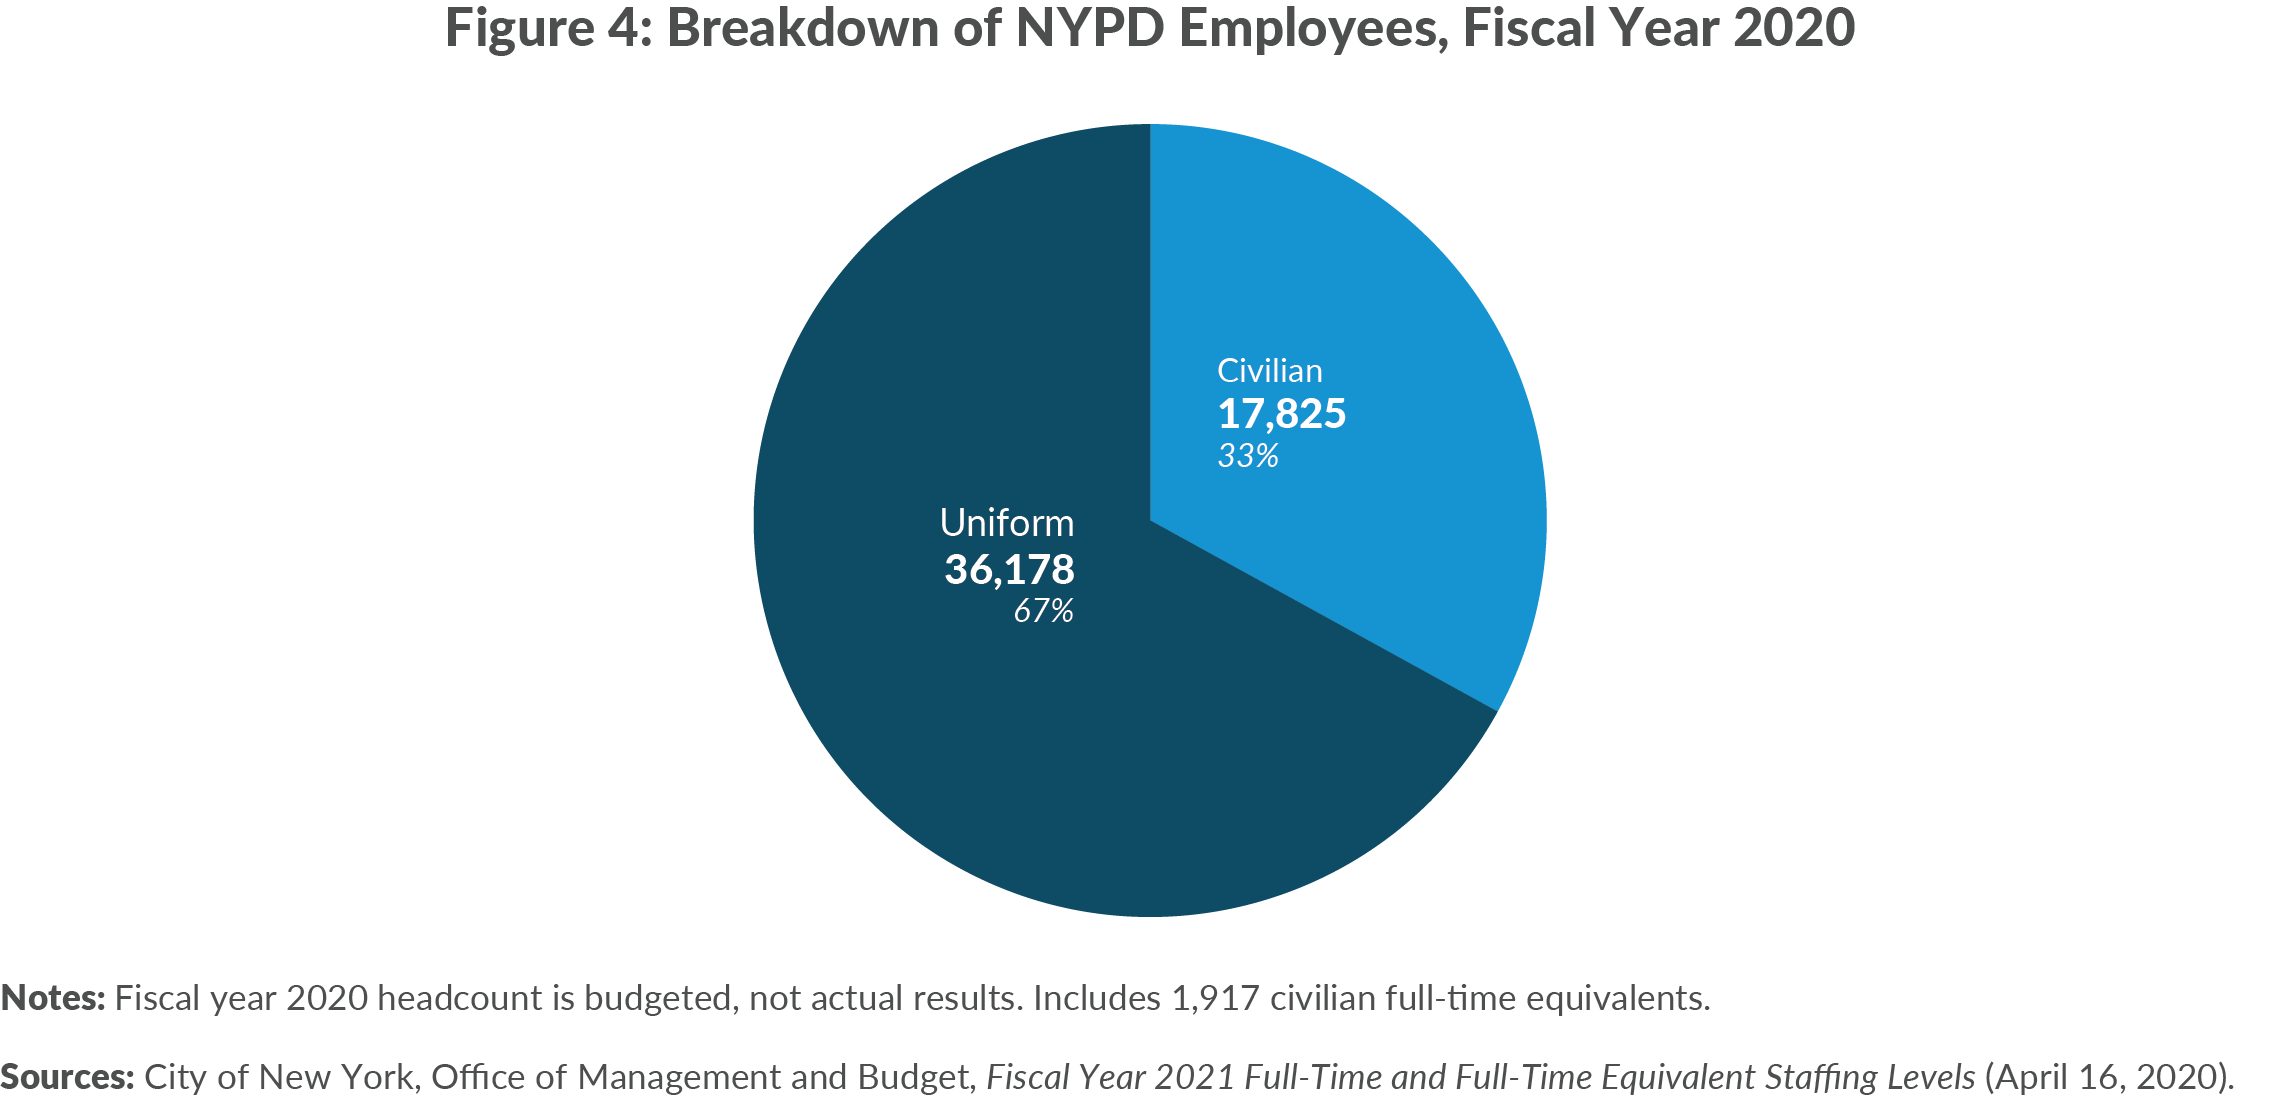 Figure 4. Breakdown of NYPD Employees, Fiscal Year 2020